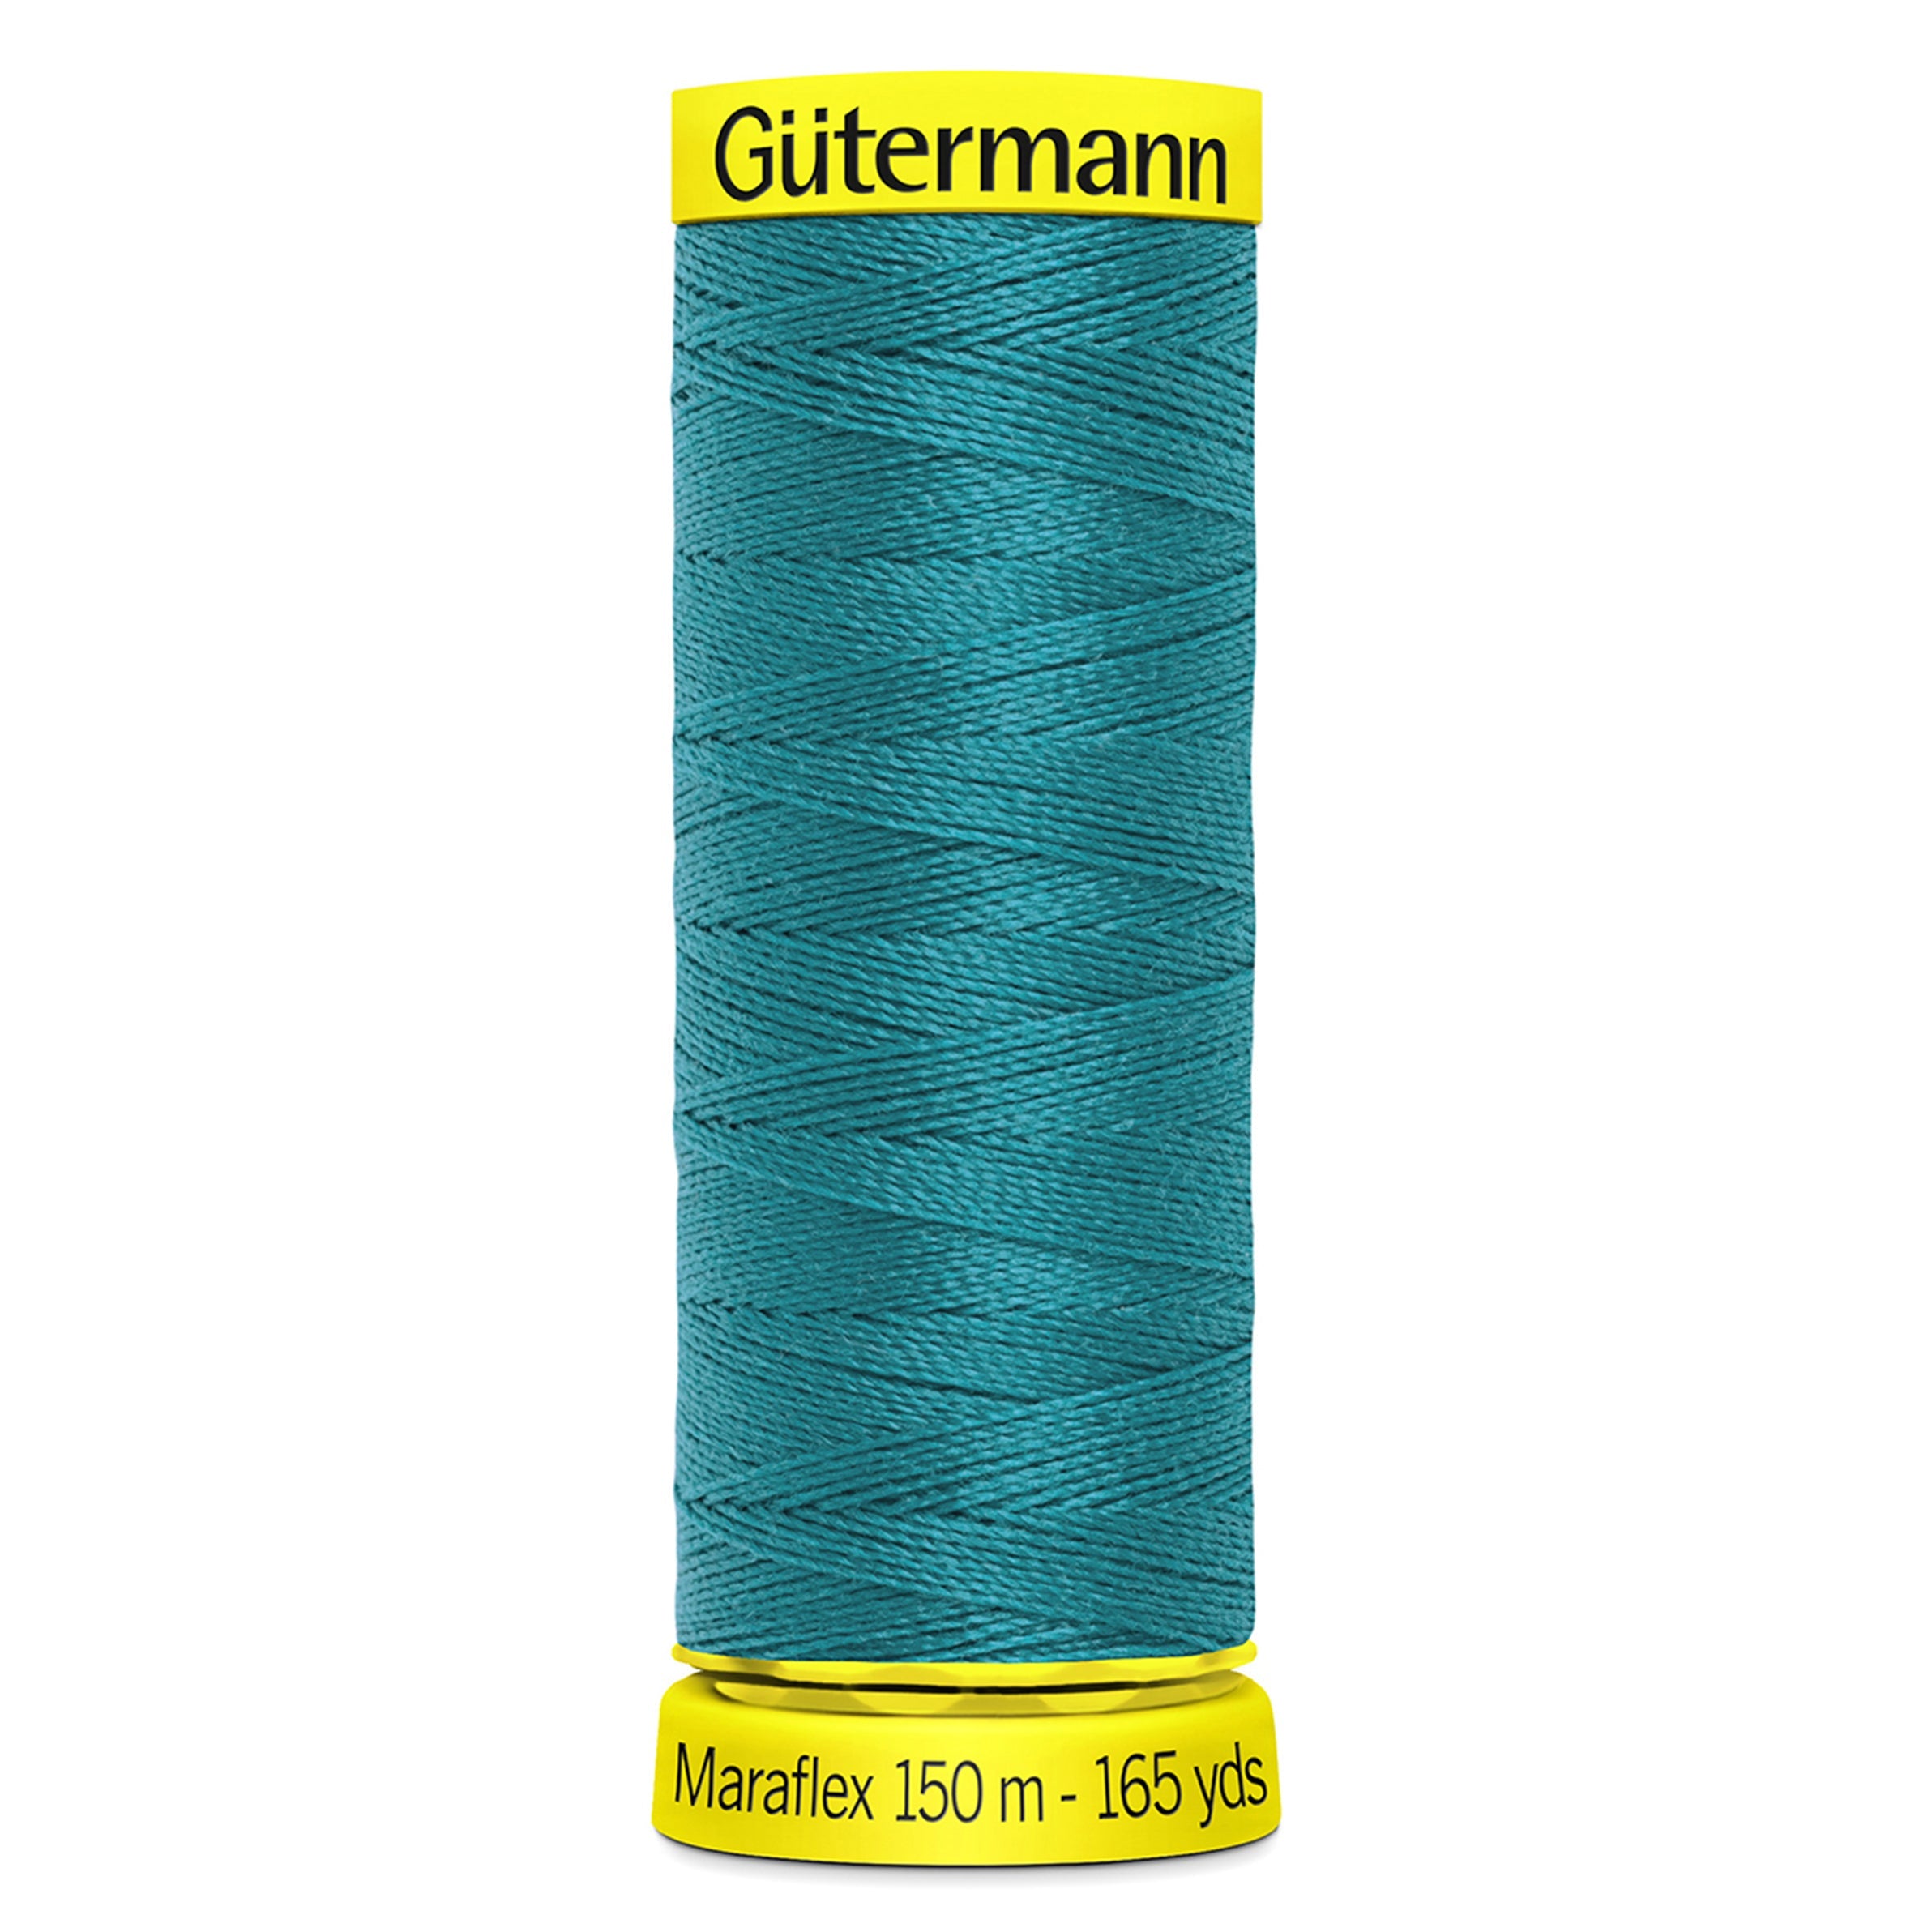 Gutermann Maraflex Stretchy Sewing Thread 150m colour 189 from Jaycotts Sewing Supplies